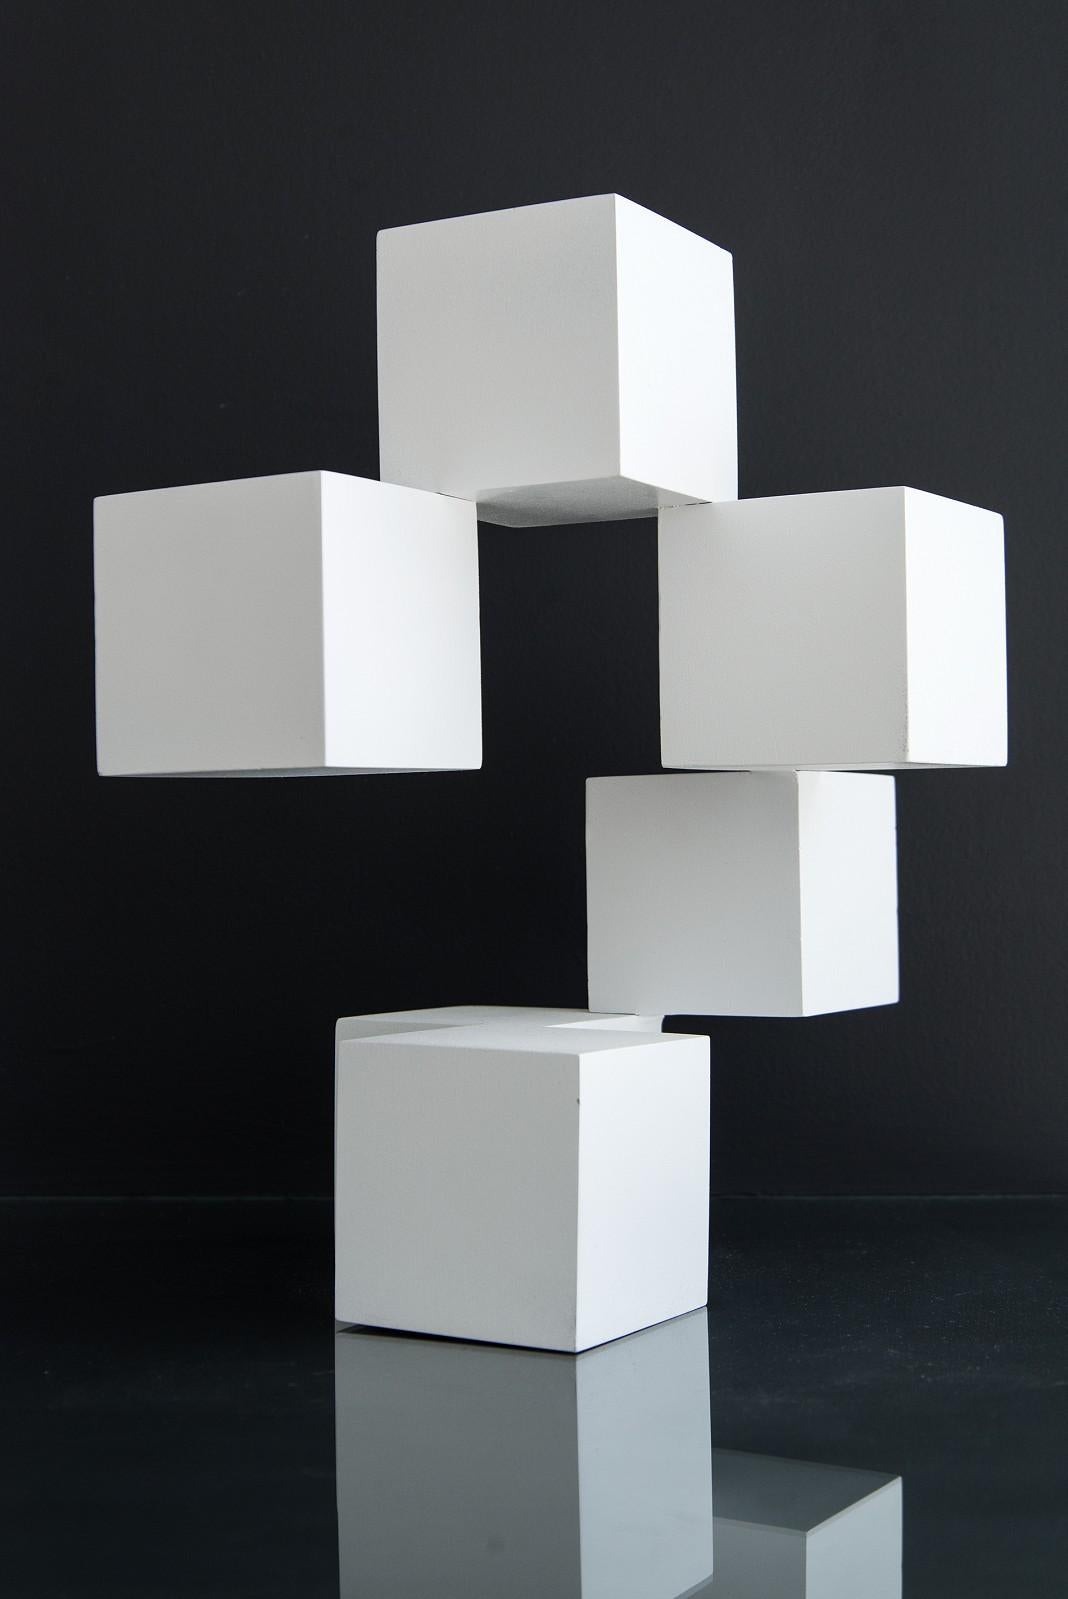 In this intriguing new contemporary sculpture by Quebec’s Phillipe Pallafray six bright white cubes appear as if suspended in space. Each cube is attached at just one corner emphasizing the delicate and fragile nature of balance. Pallafray uses